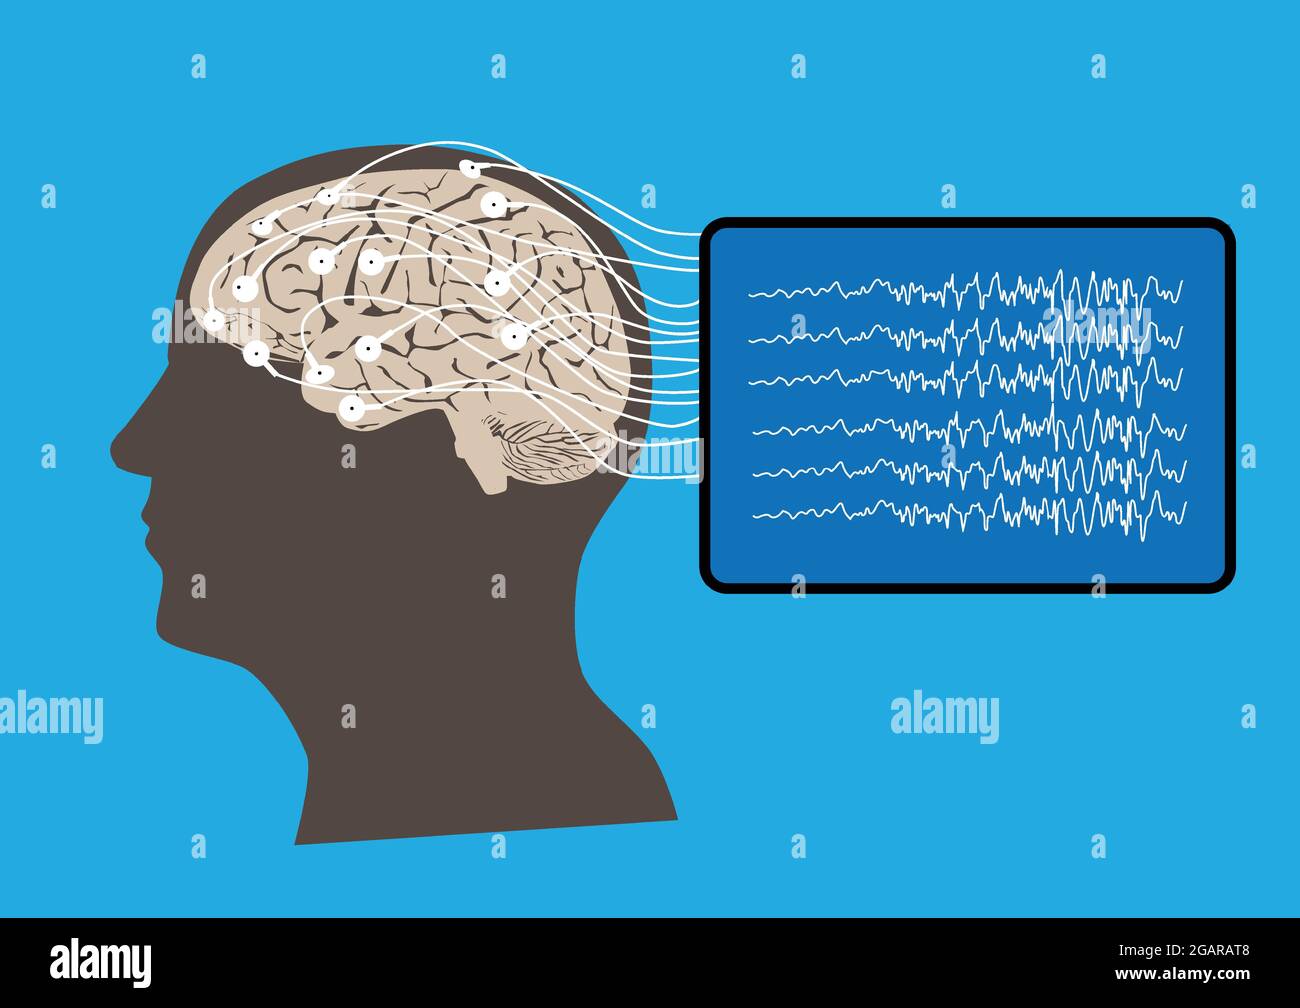 Illustration of human brain and electroencephalography or EEG recording and brain waves Stock Vector